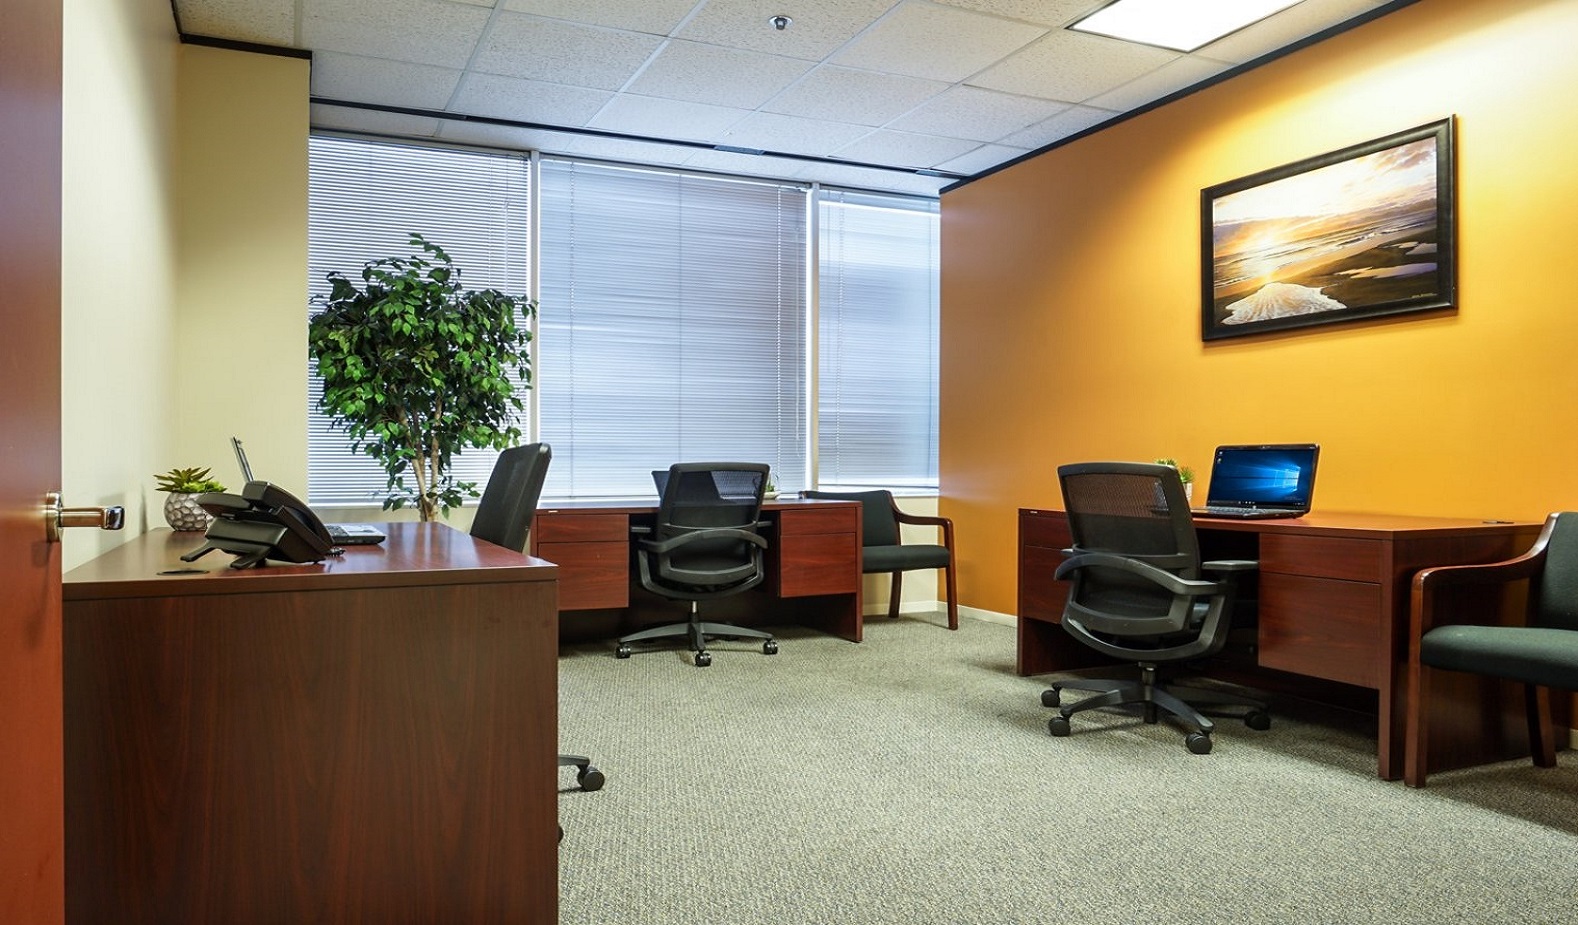 North Houston Executive Office Suites - Shared Office with Window